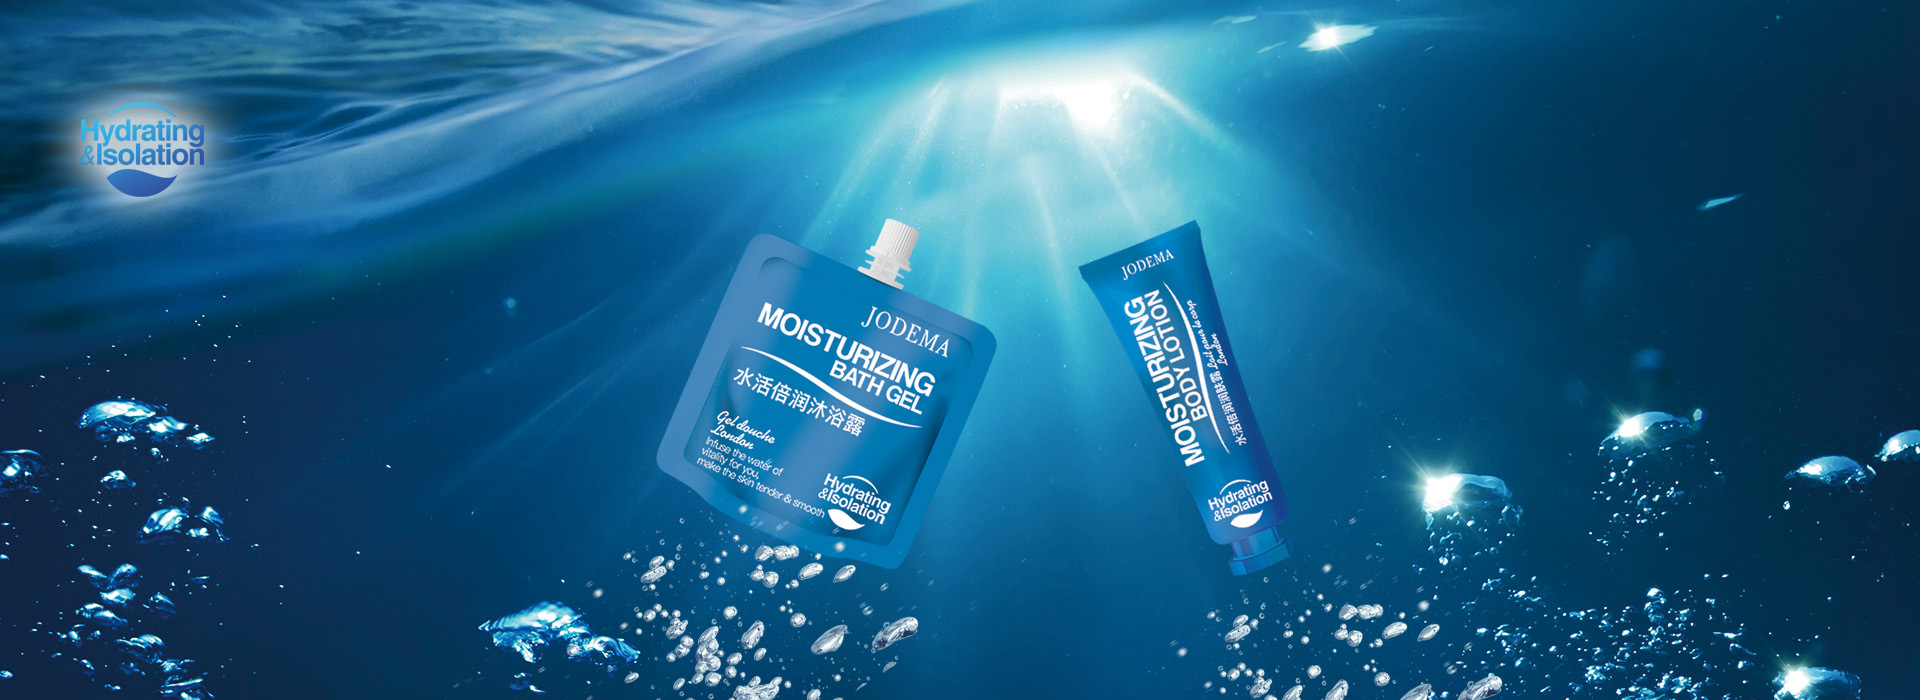 The Advanced Hydration series is infused with hyaluronic acid, bringing nourishment and rejuvenation to the hair. It brings a refreshing experience similar to seawater, providing light nourishment and getting rid of dryness. 